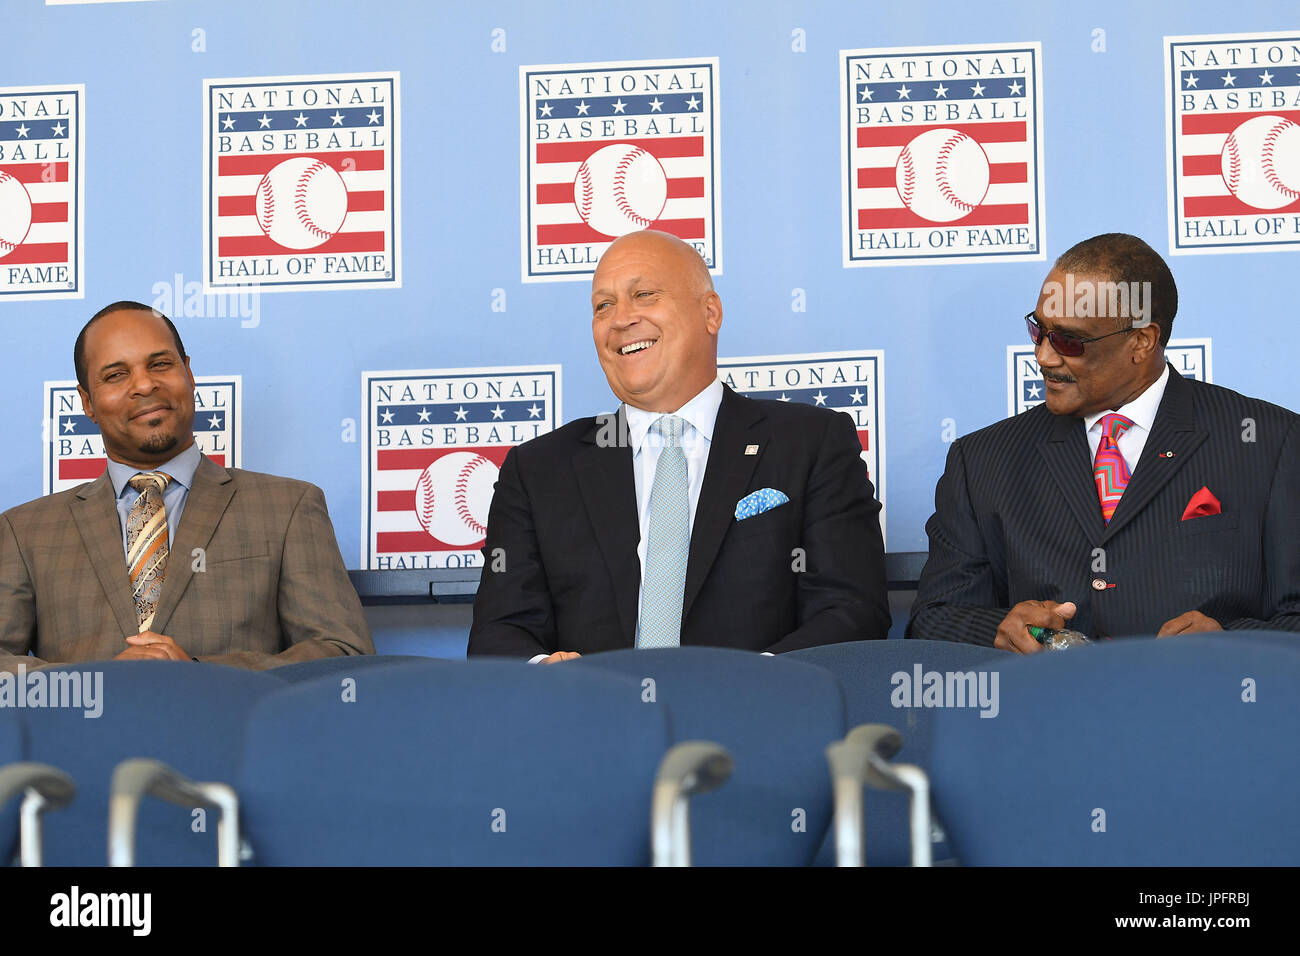 New York, NY, USA. 29th July, 2017. Hall of Fame members Barry Larkin, Cal Ripken Jr. and Jim Rice attends the National Baseball Hall of Fame Induction Ceremony at Clark Sports Center on July 30, 2017 during the Induction Weekend in Cooperstown, New York. Credit: John Palmer/Media Punch/Alamy Live News Stock Photo